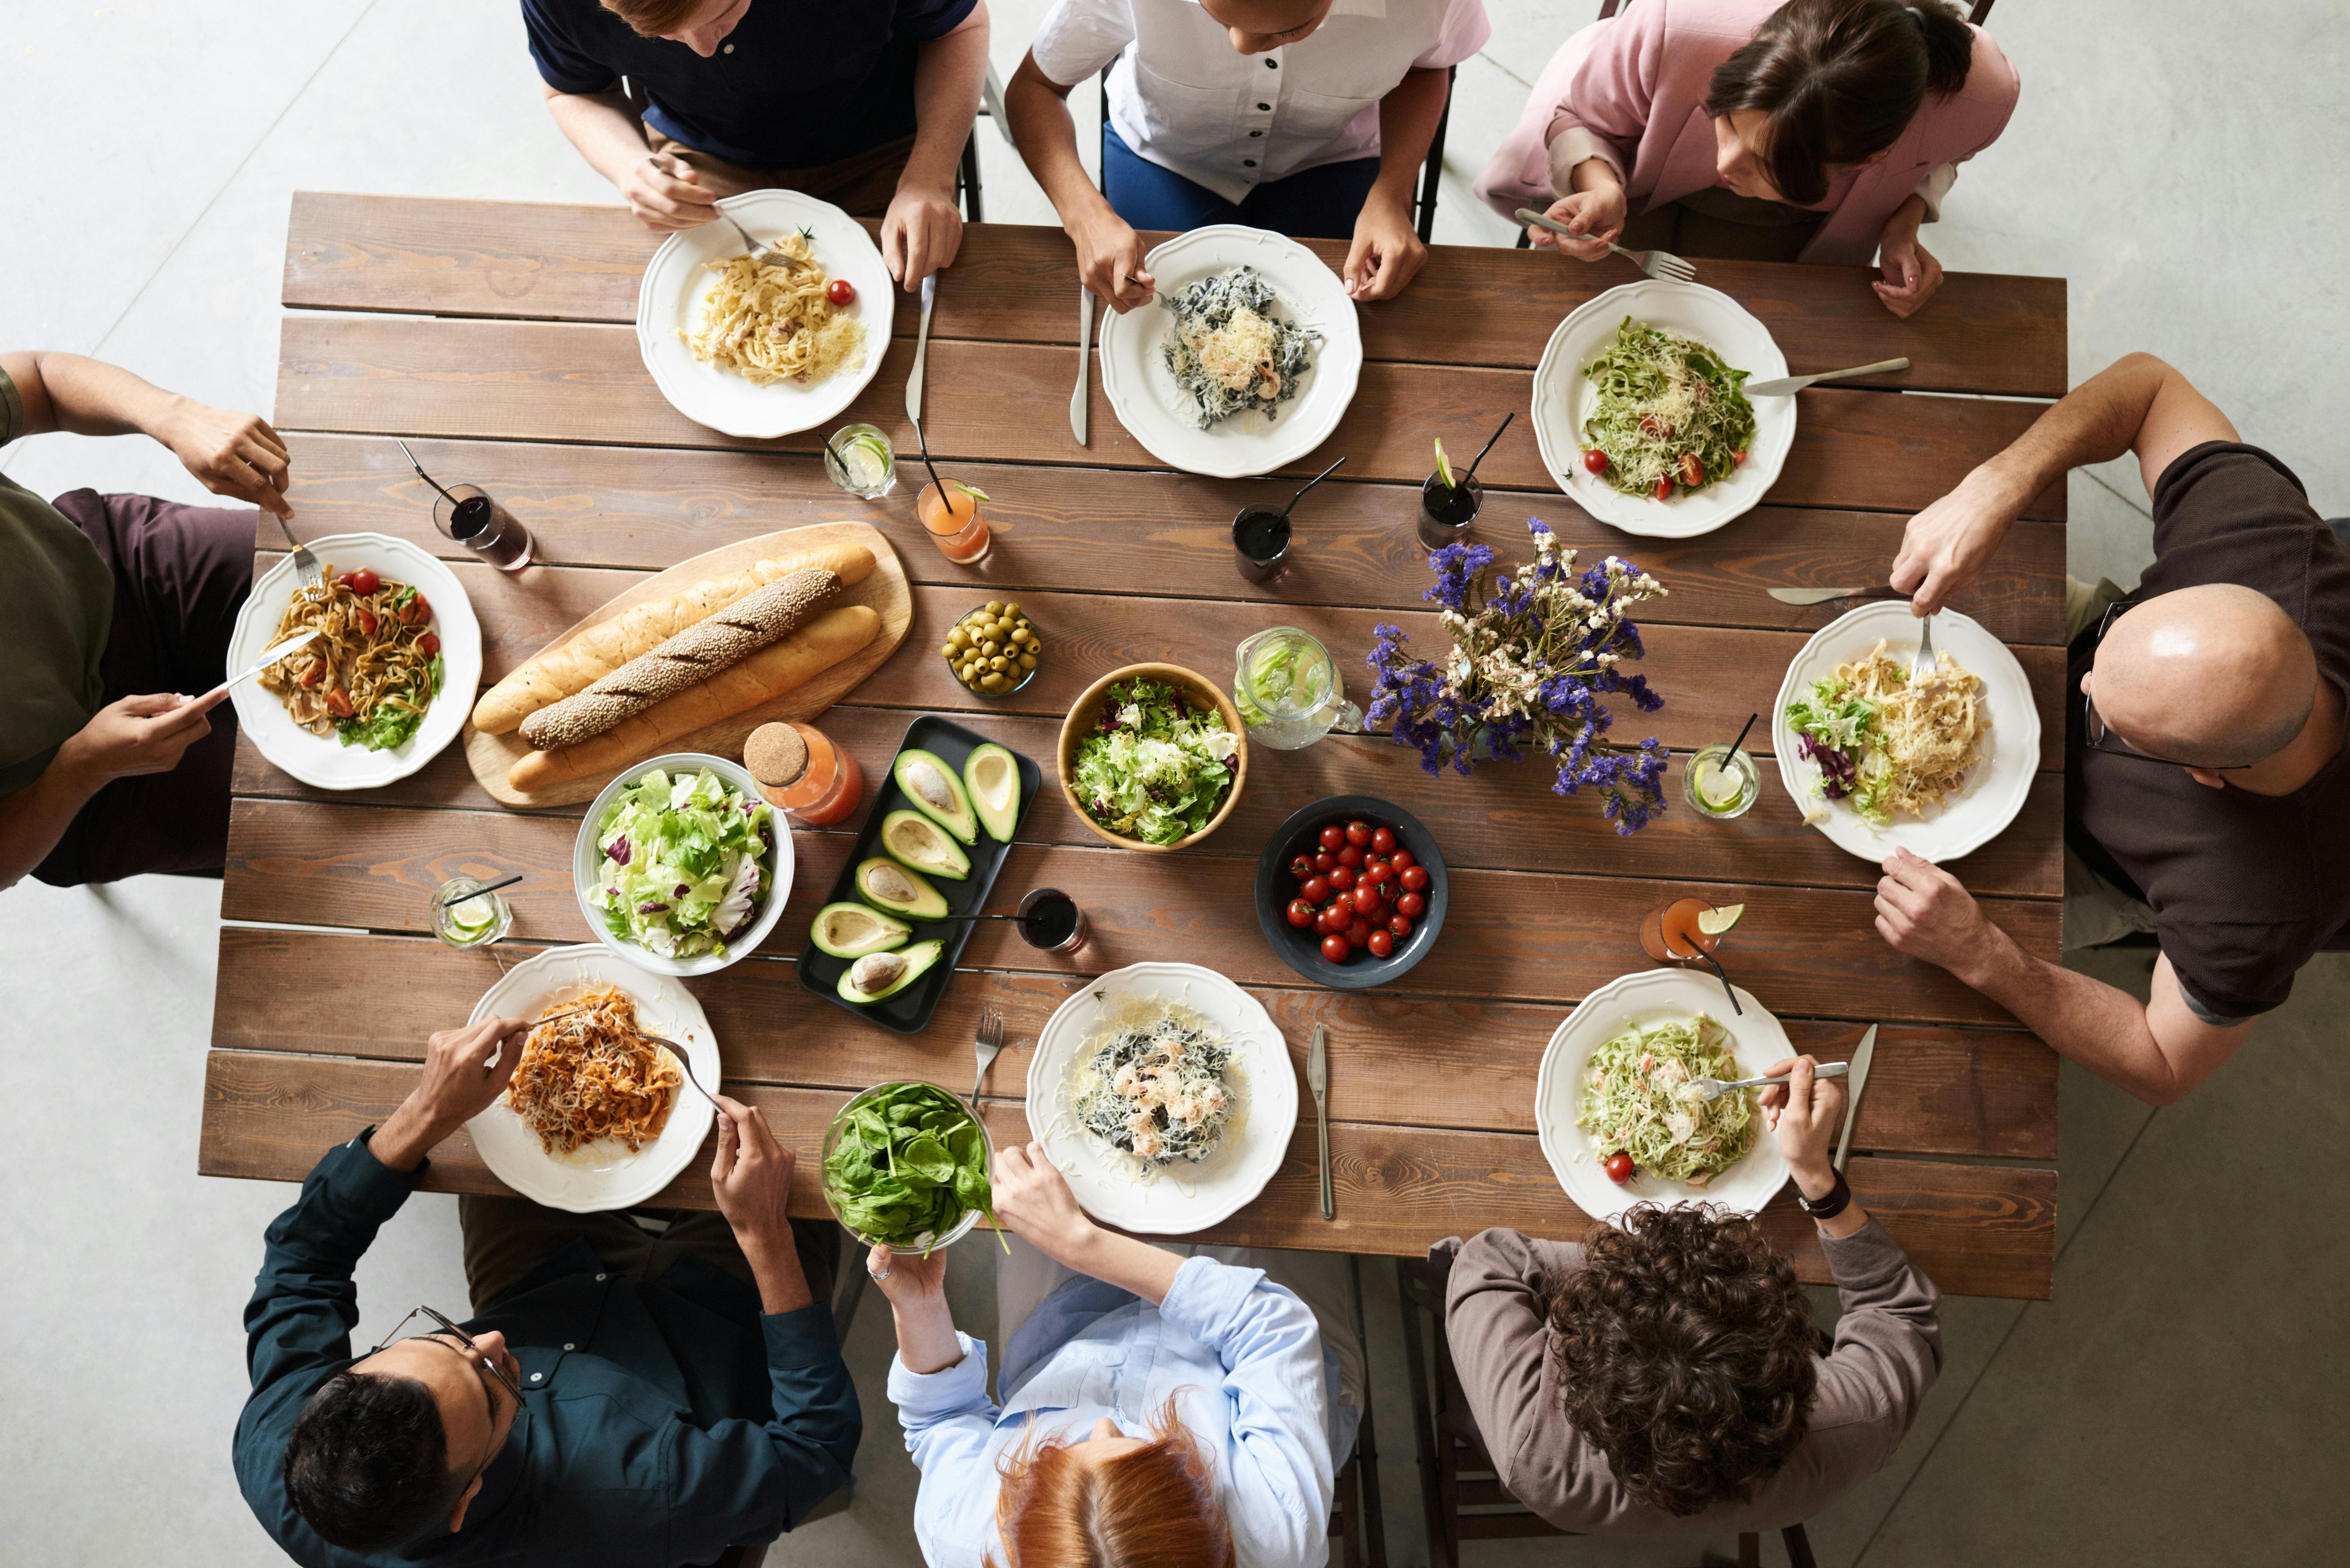 Feed Your Family for Less: 10 Budget-Friendly Restaurant Deals Under $20